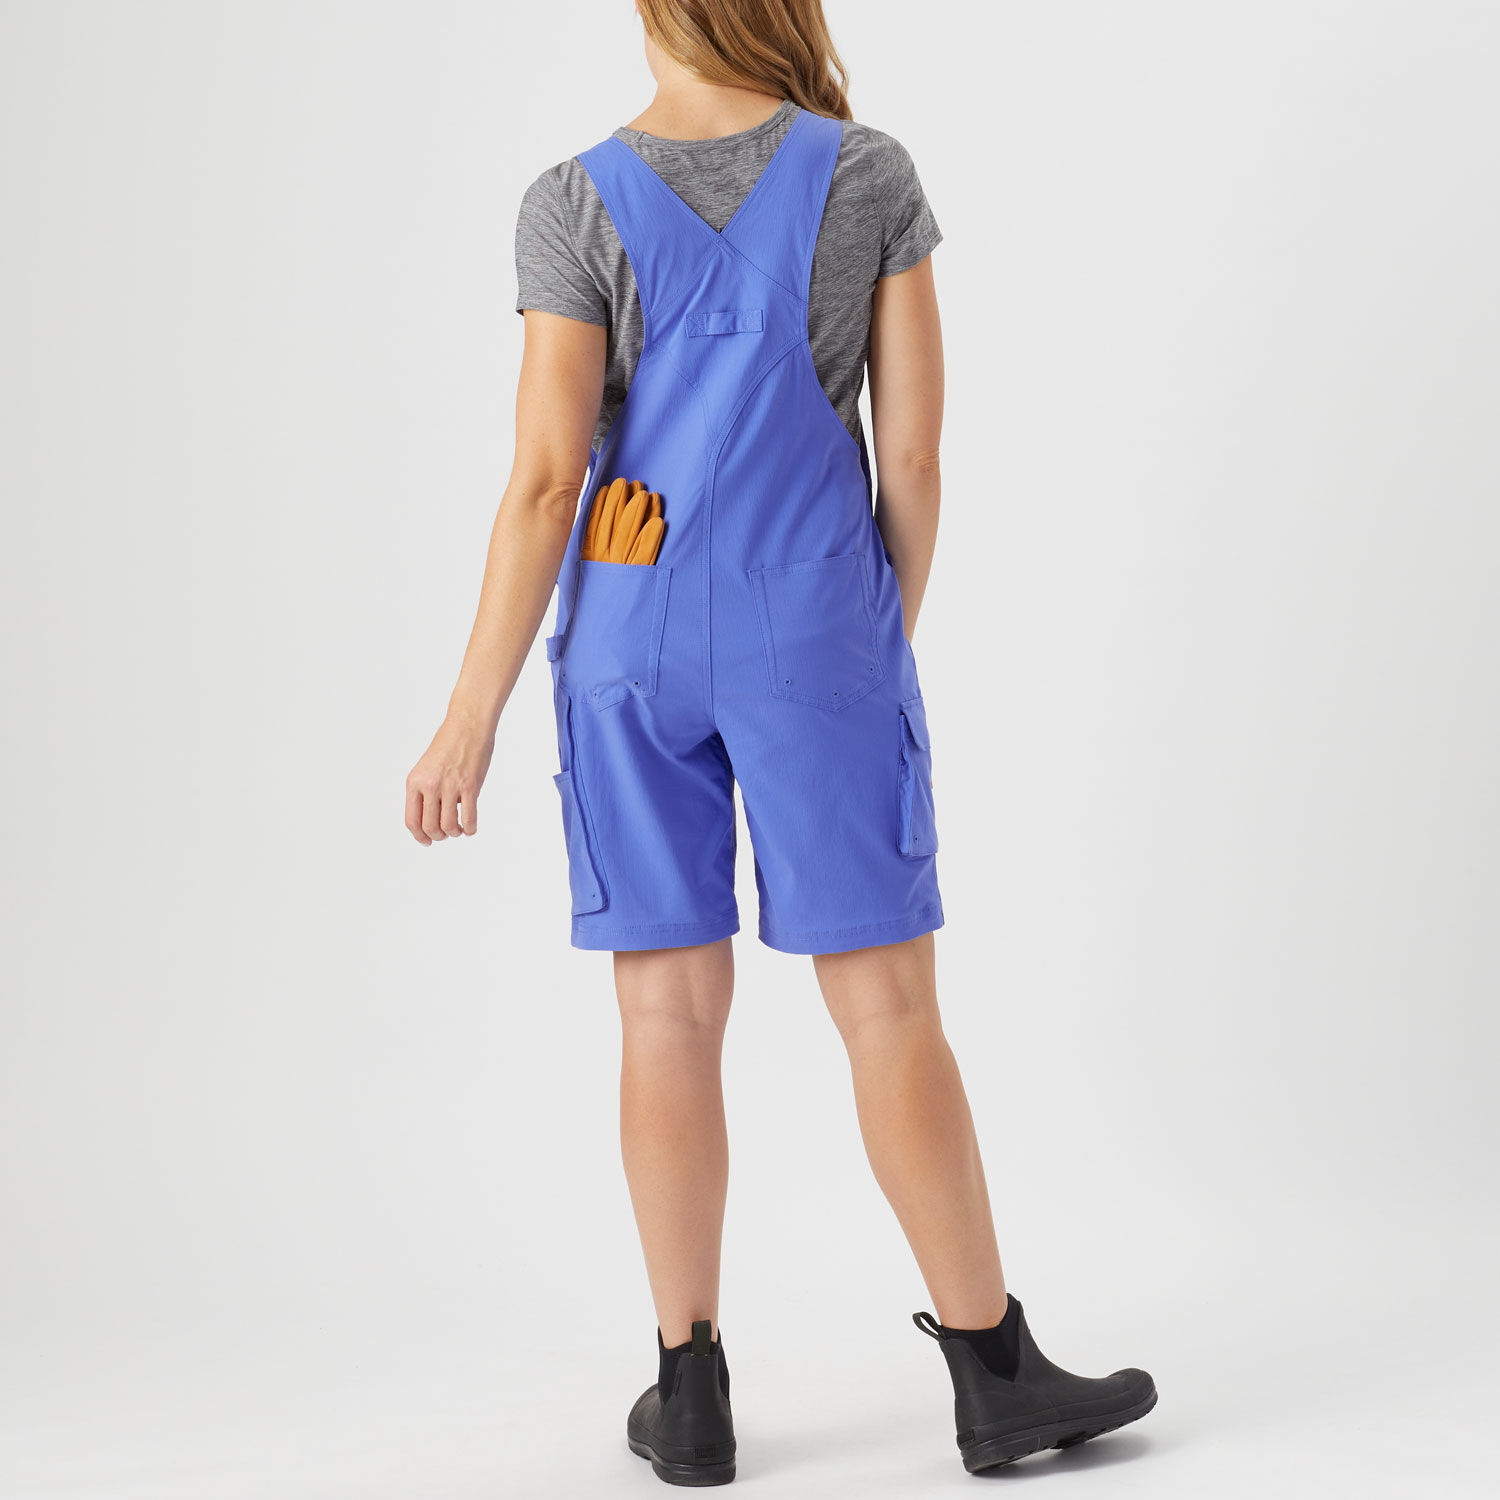 Denim Rompers For Women Wide Leg, Casual Pants With Playsuit Style Jumpsuit  Perfect For Summer From Y28j, $20.48 | DHgate.Com